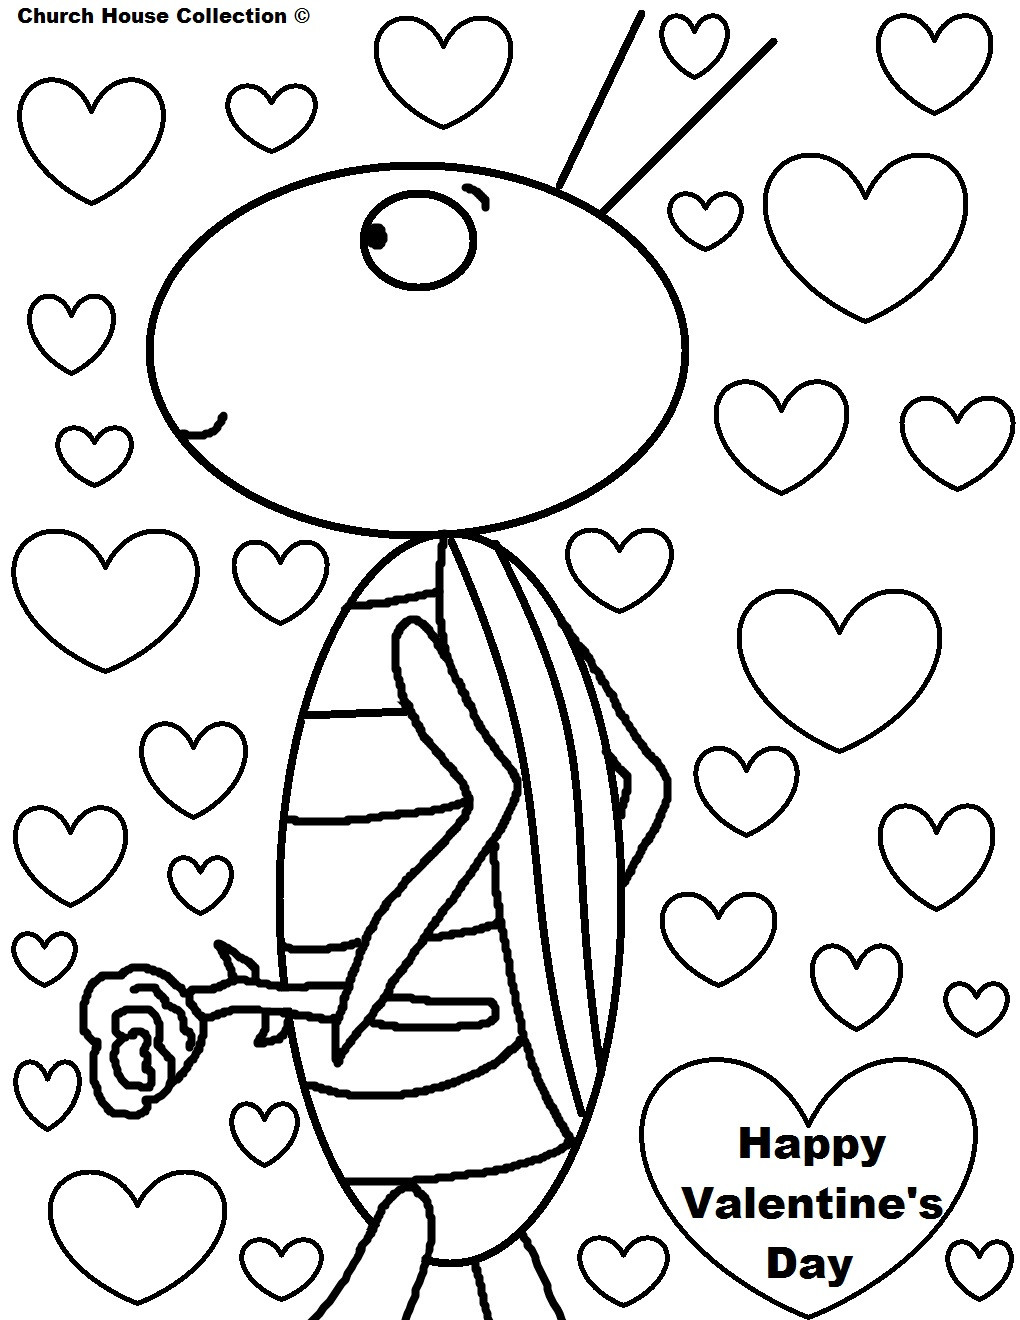 Coloring Pages For Kids Valentines Day
 Church House Collection Blog Valentine s Day Coloring